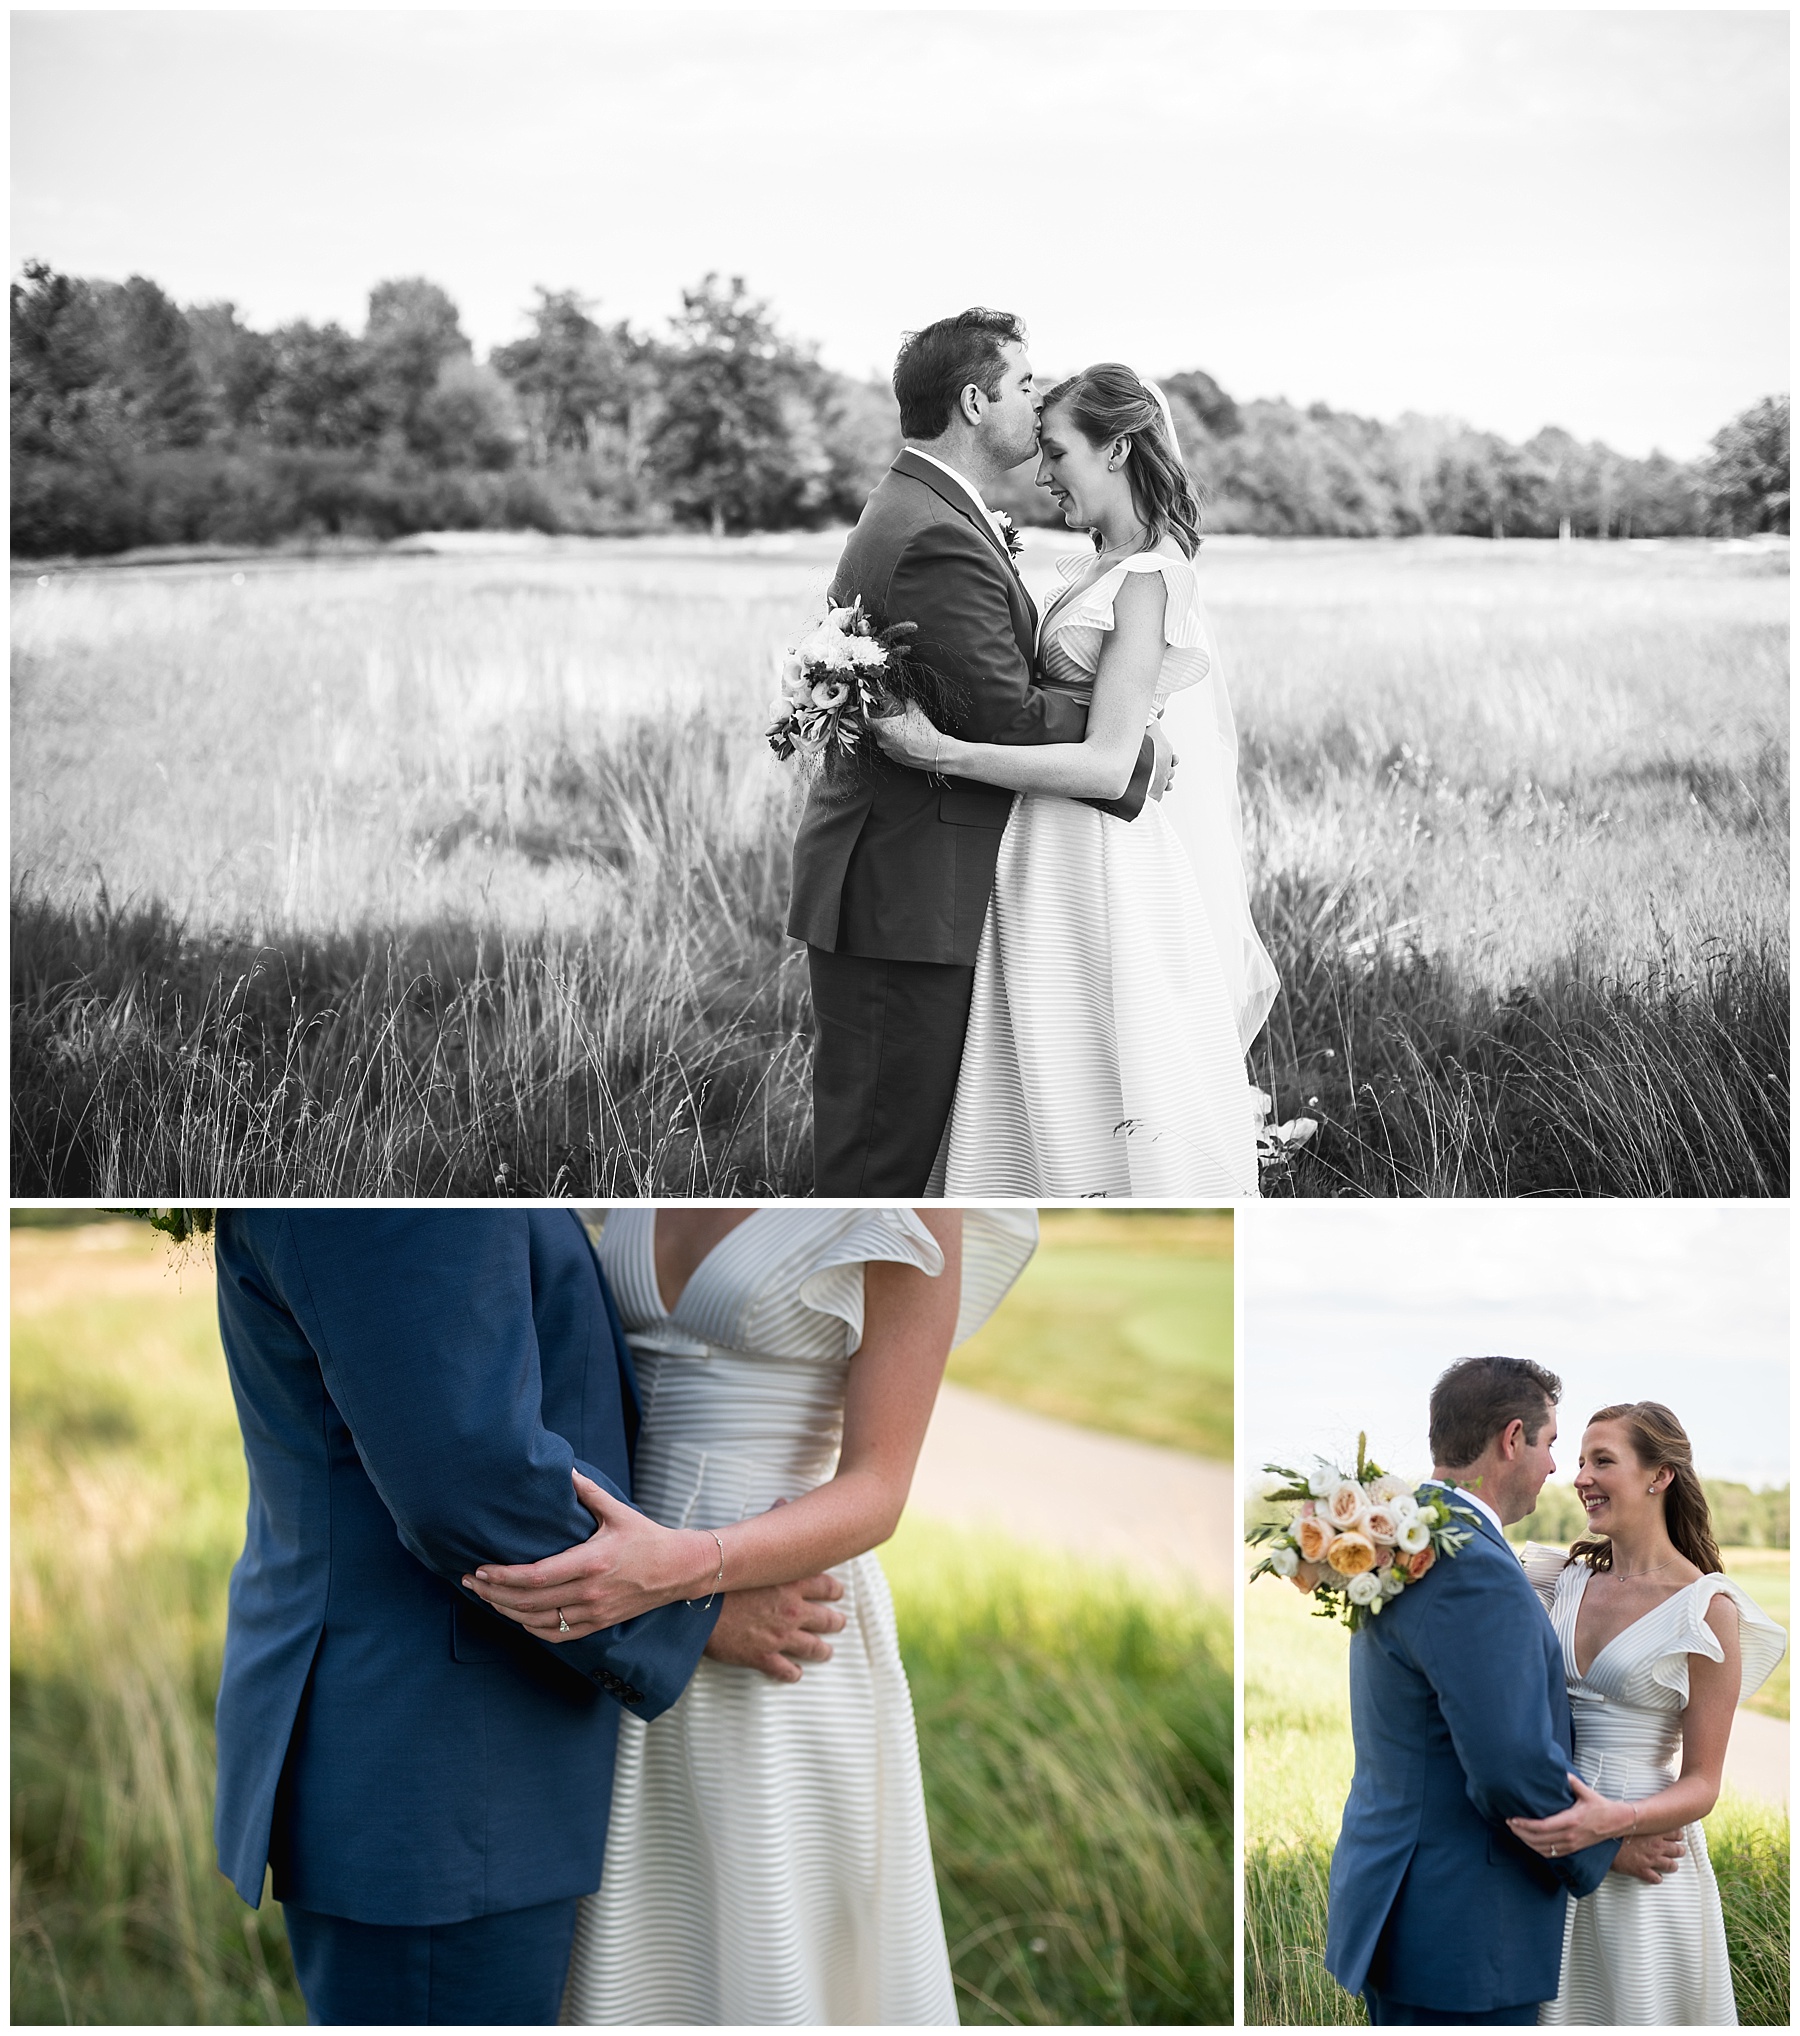 bride and groom portraits on wedding day